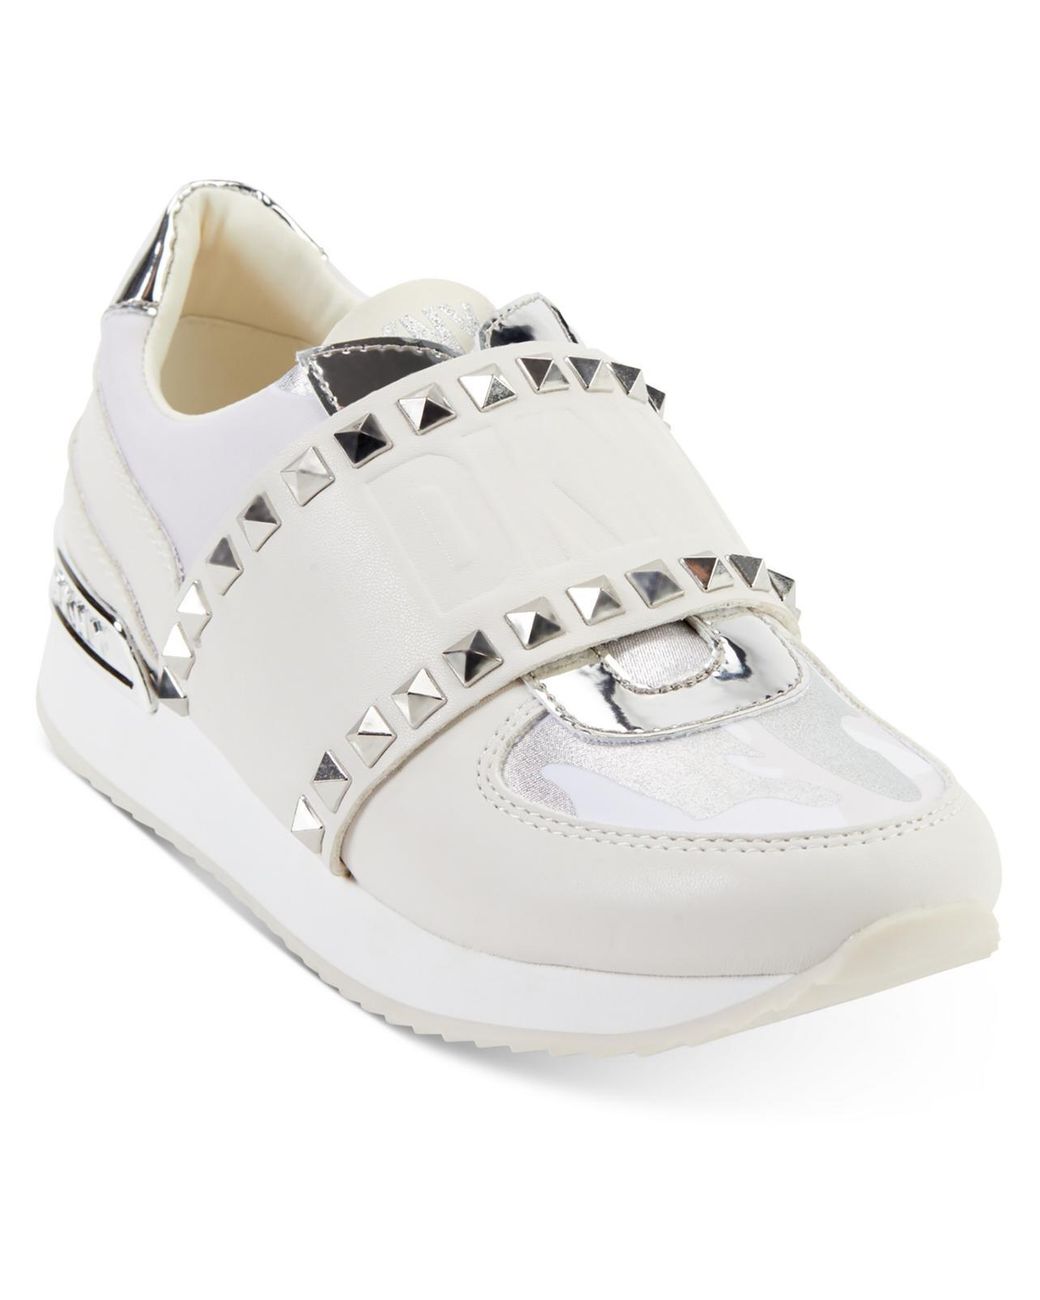 DKNY Marlin Studded Lifestyle Slip-on Sneakers in White | Lyst